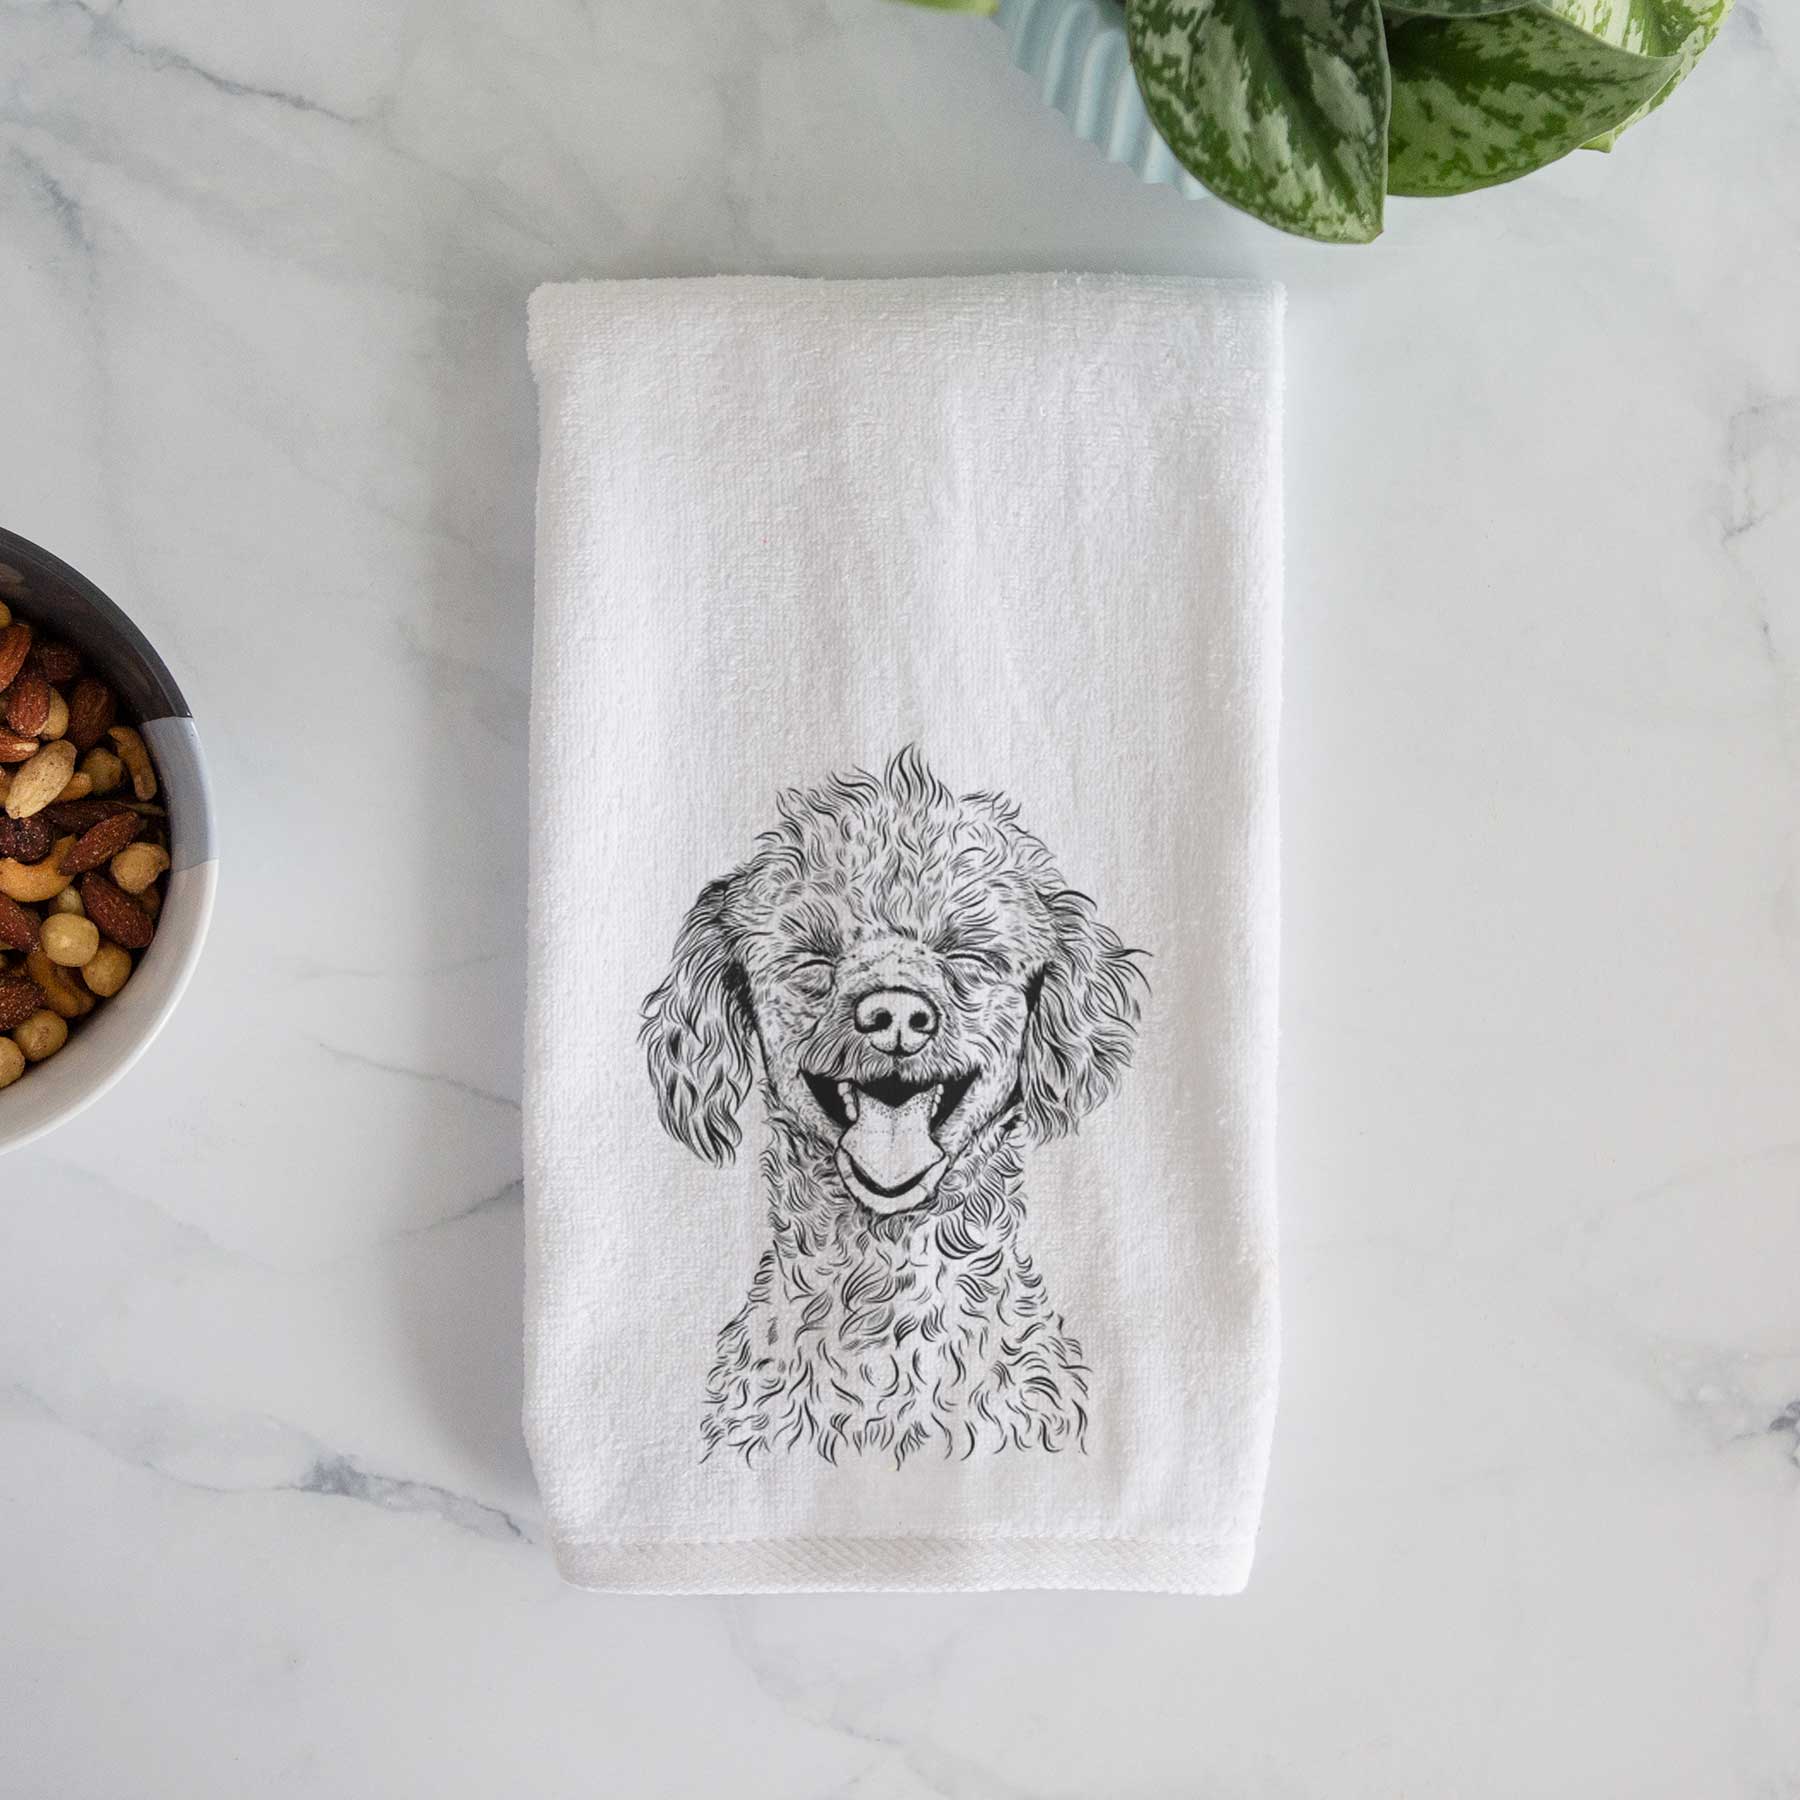 Rusty the Toy Poodle Hand Towel